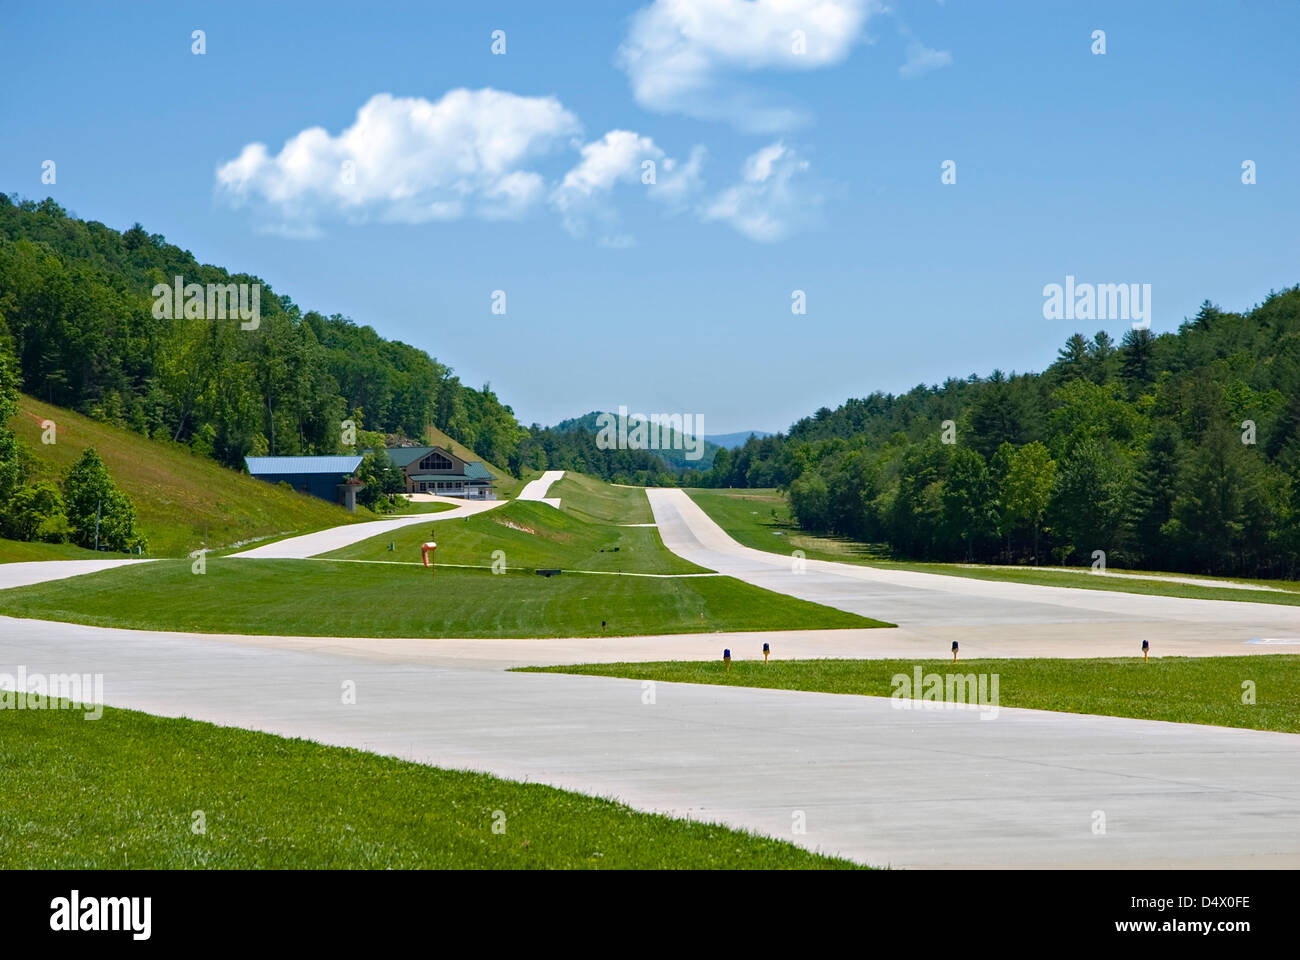 A small private airport runway, with a road intersecting it, in the north Georgia mountains, buildings in the distance. Stock Photo